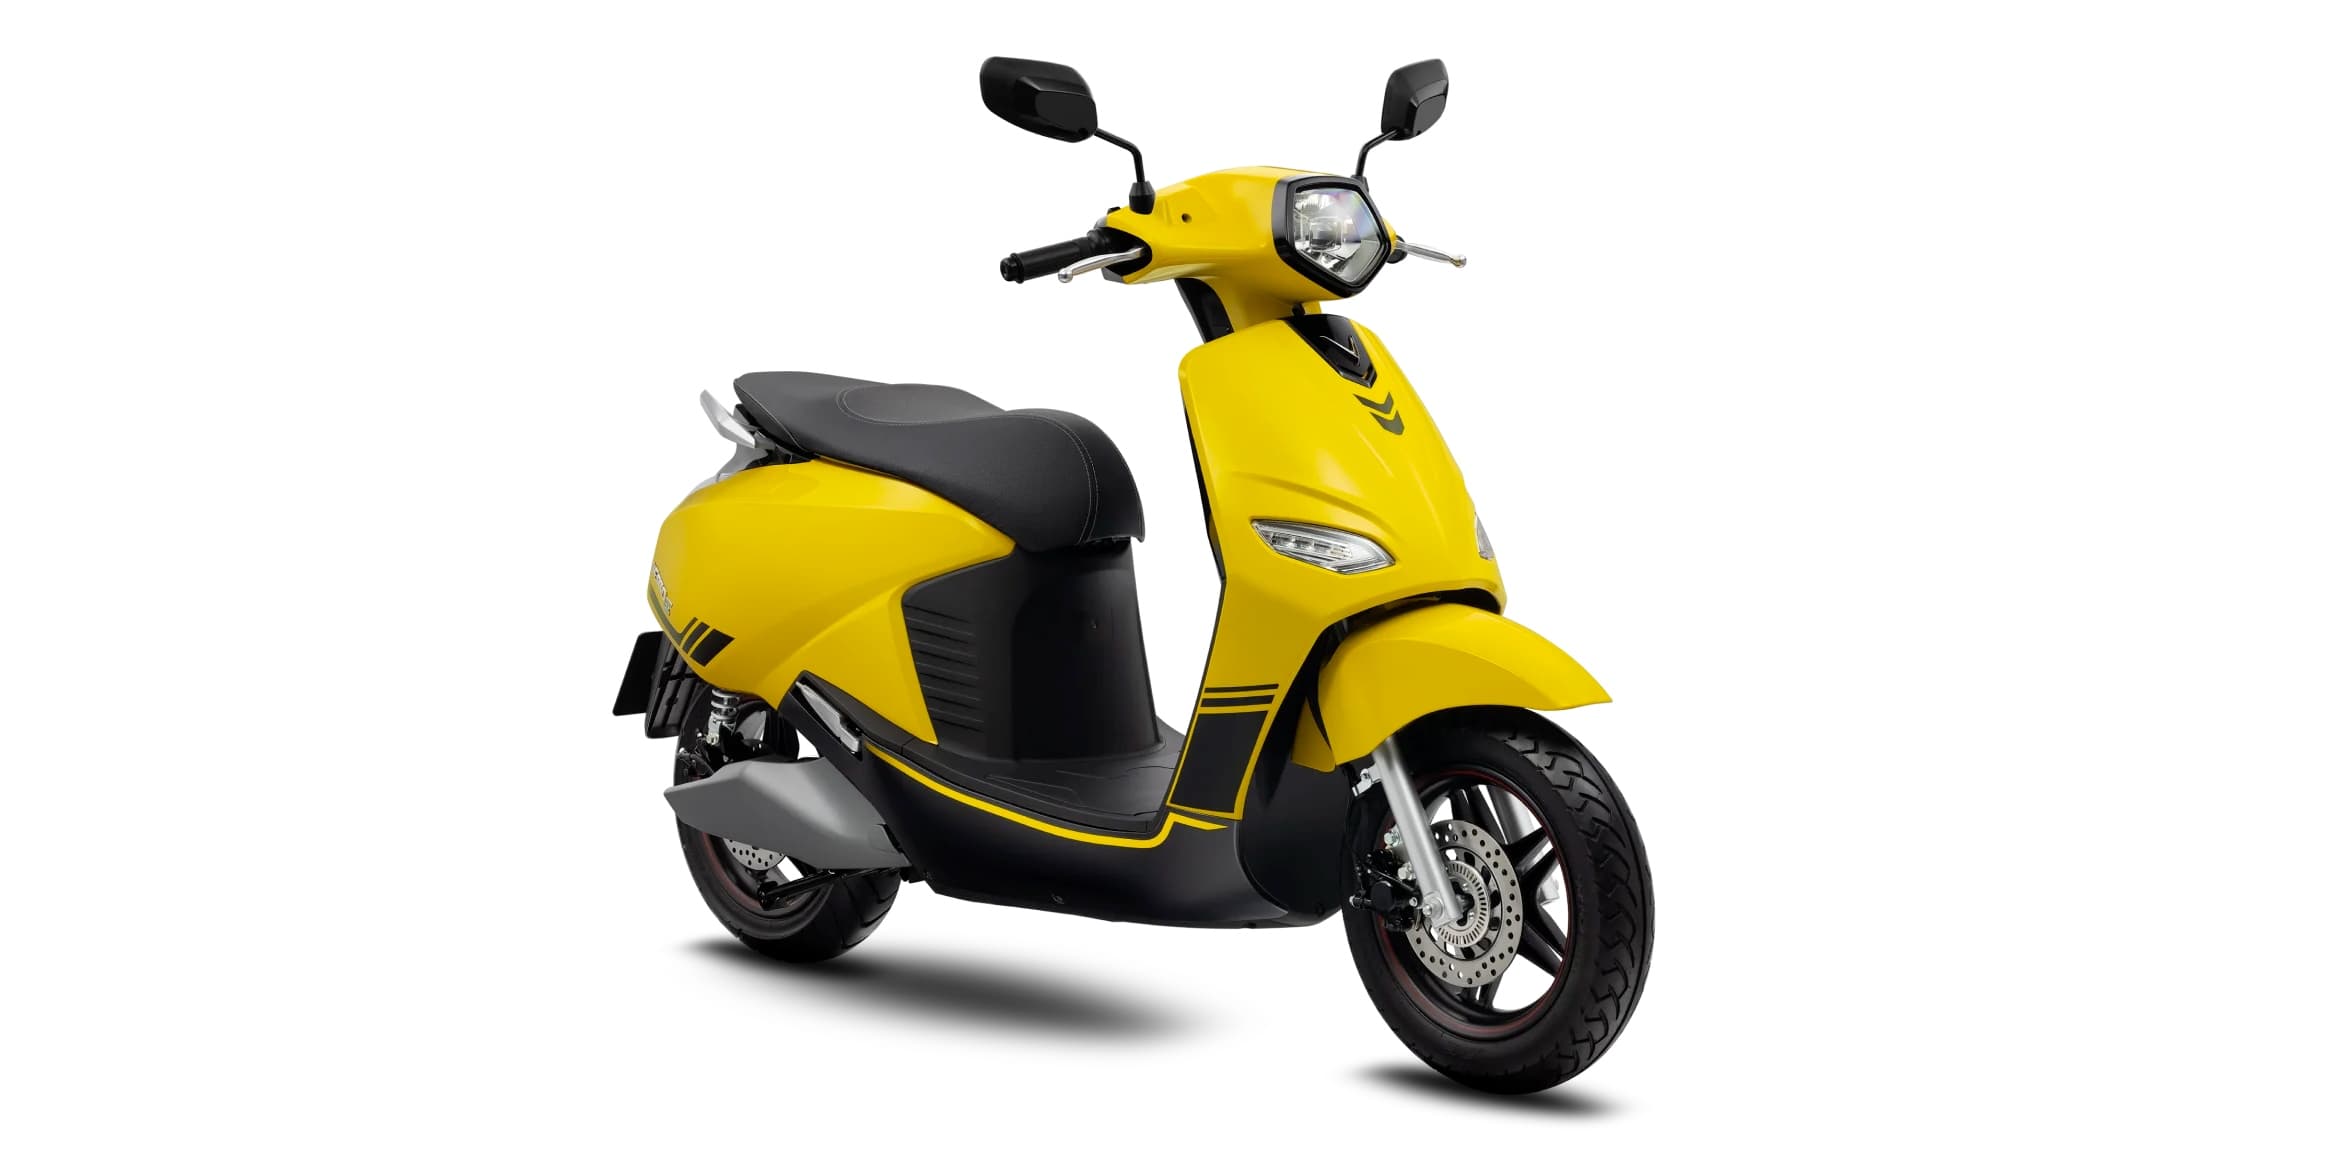 VinFast produce and sell its Vespa-style electric scooters in the US